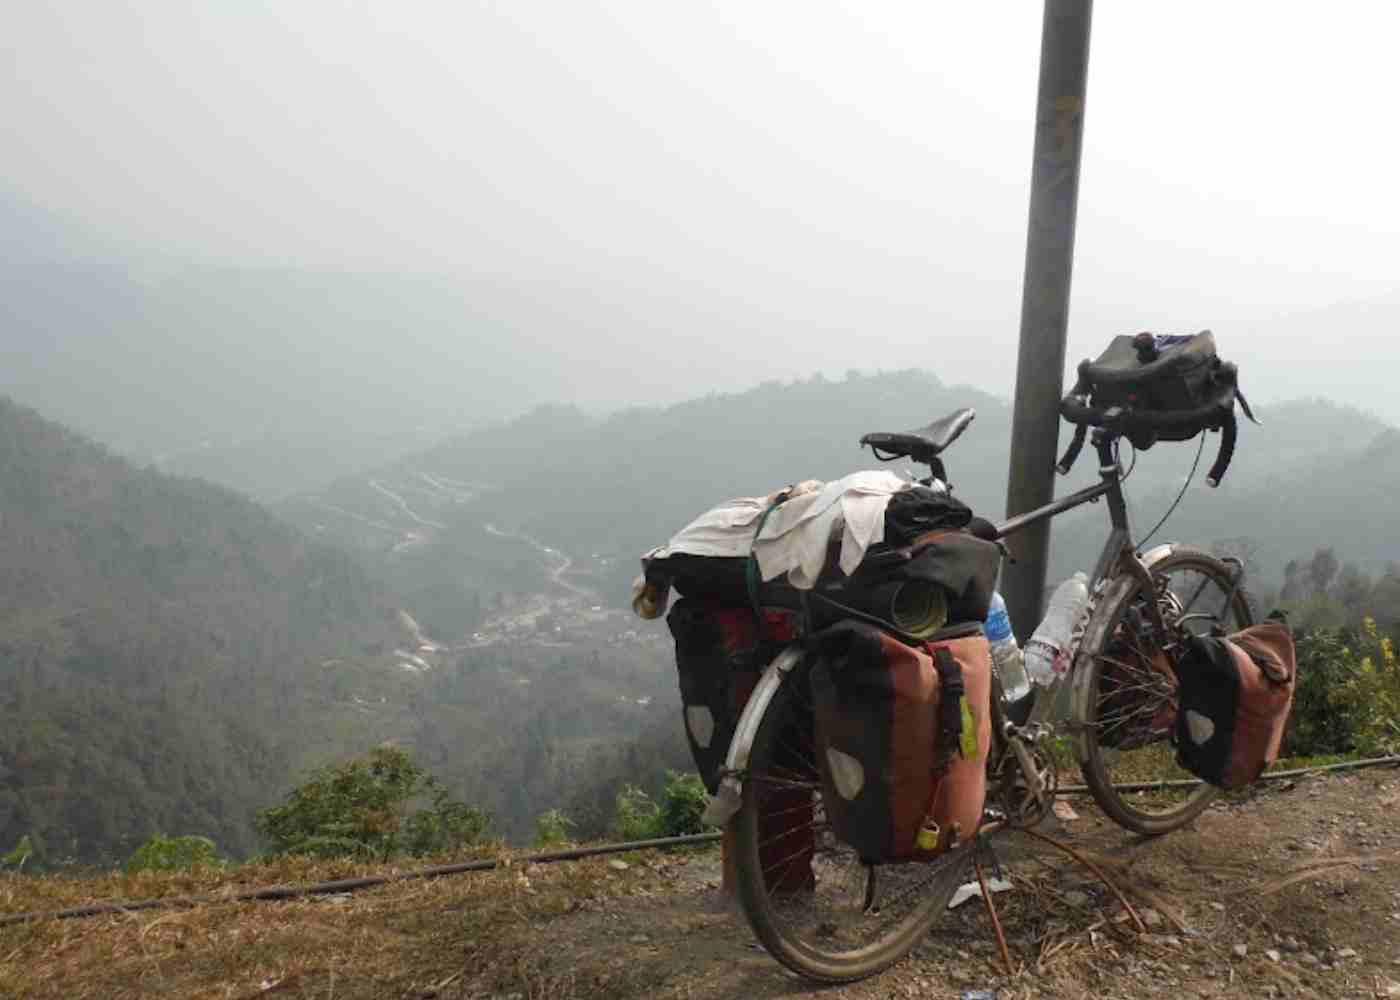 Taking in the View in North East India